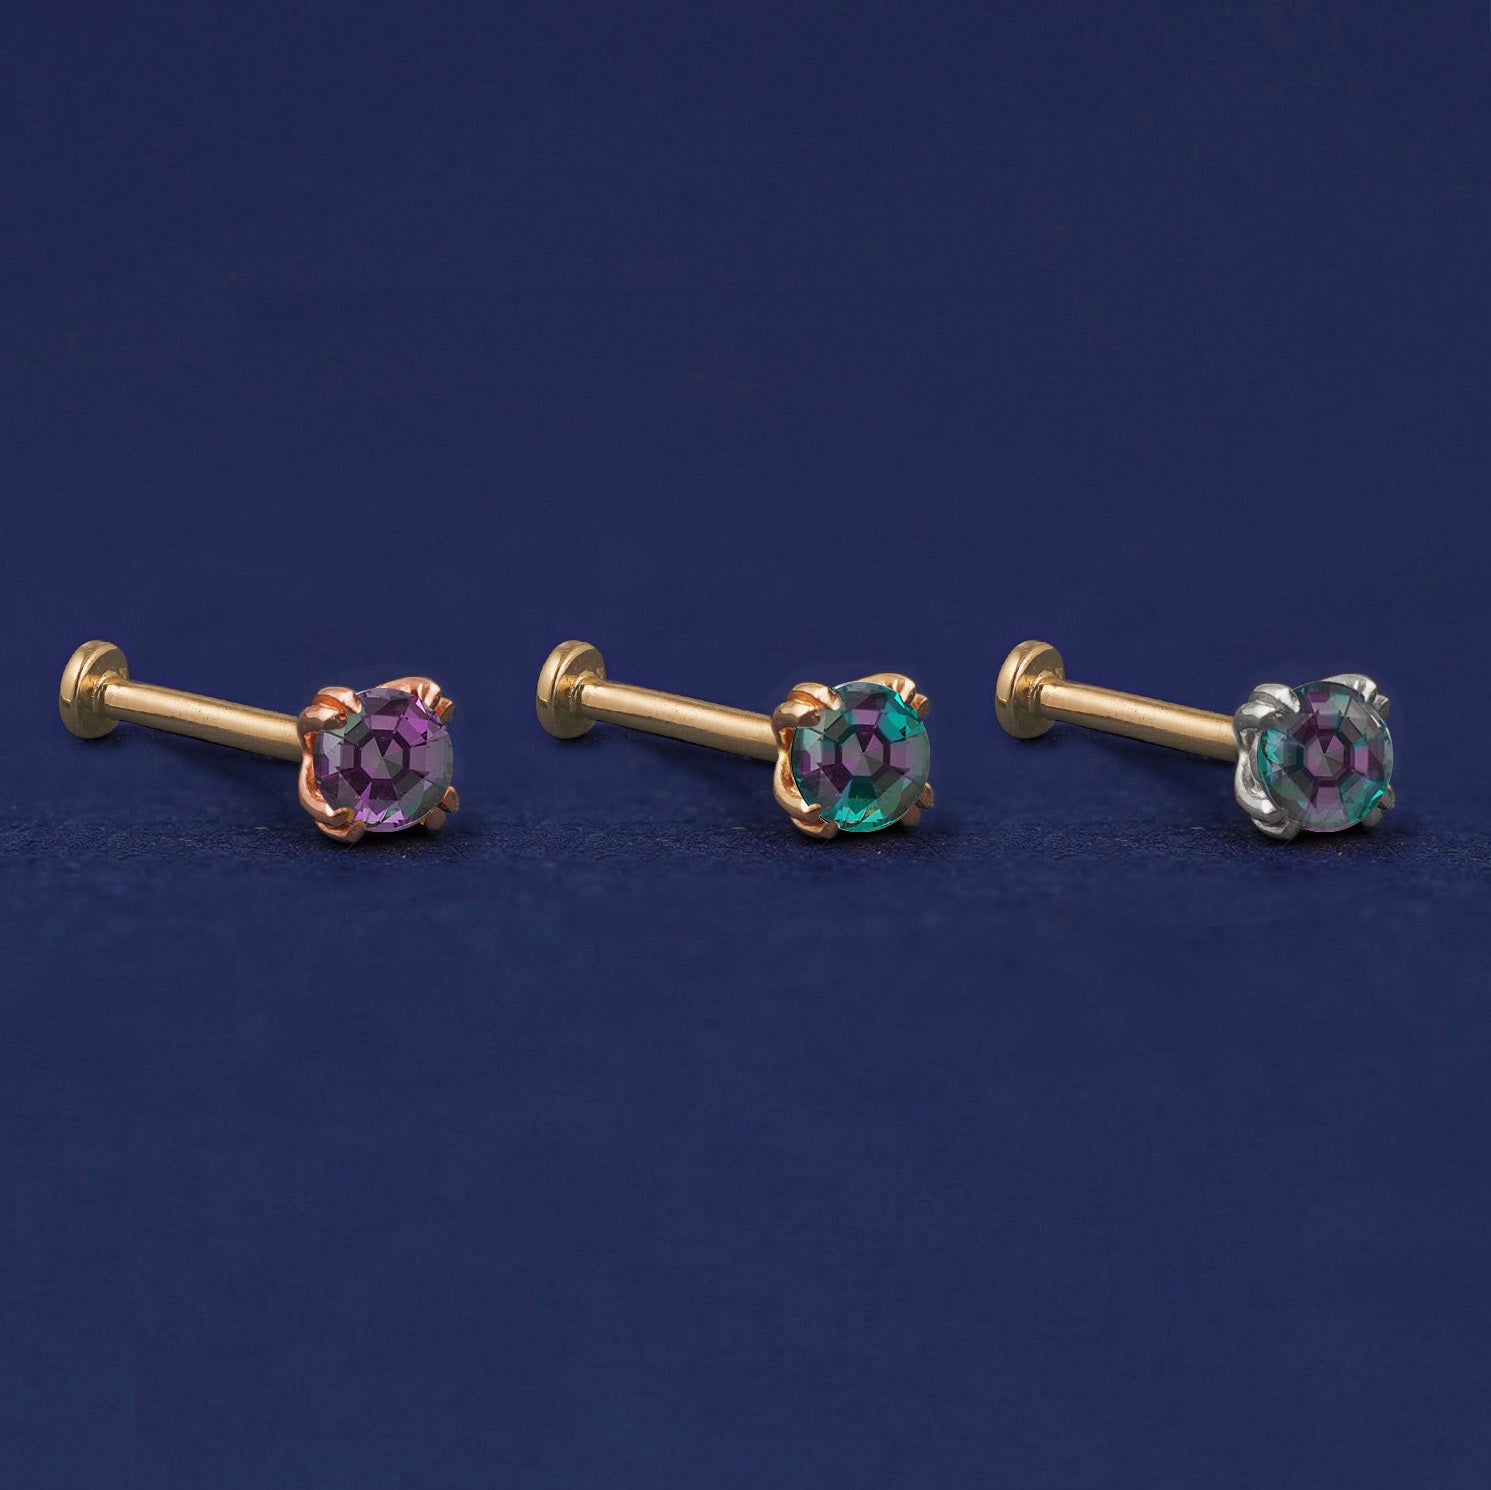 Three versions of the Alexandrite Flat Back Earring shown in options of rose, yellow, and white gold